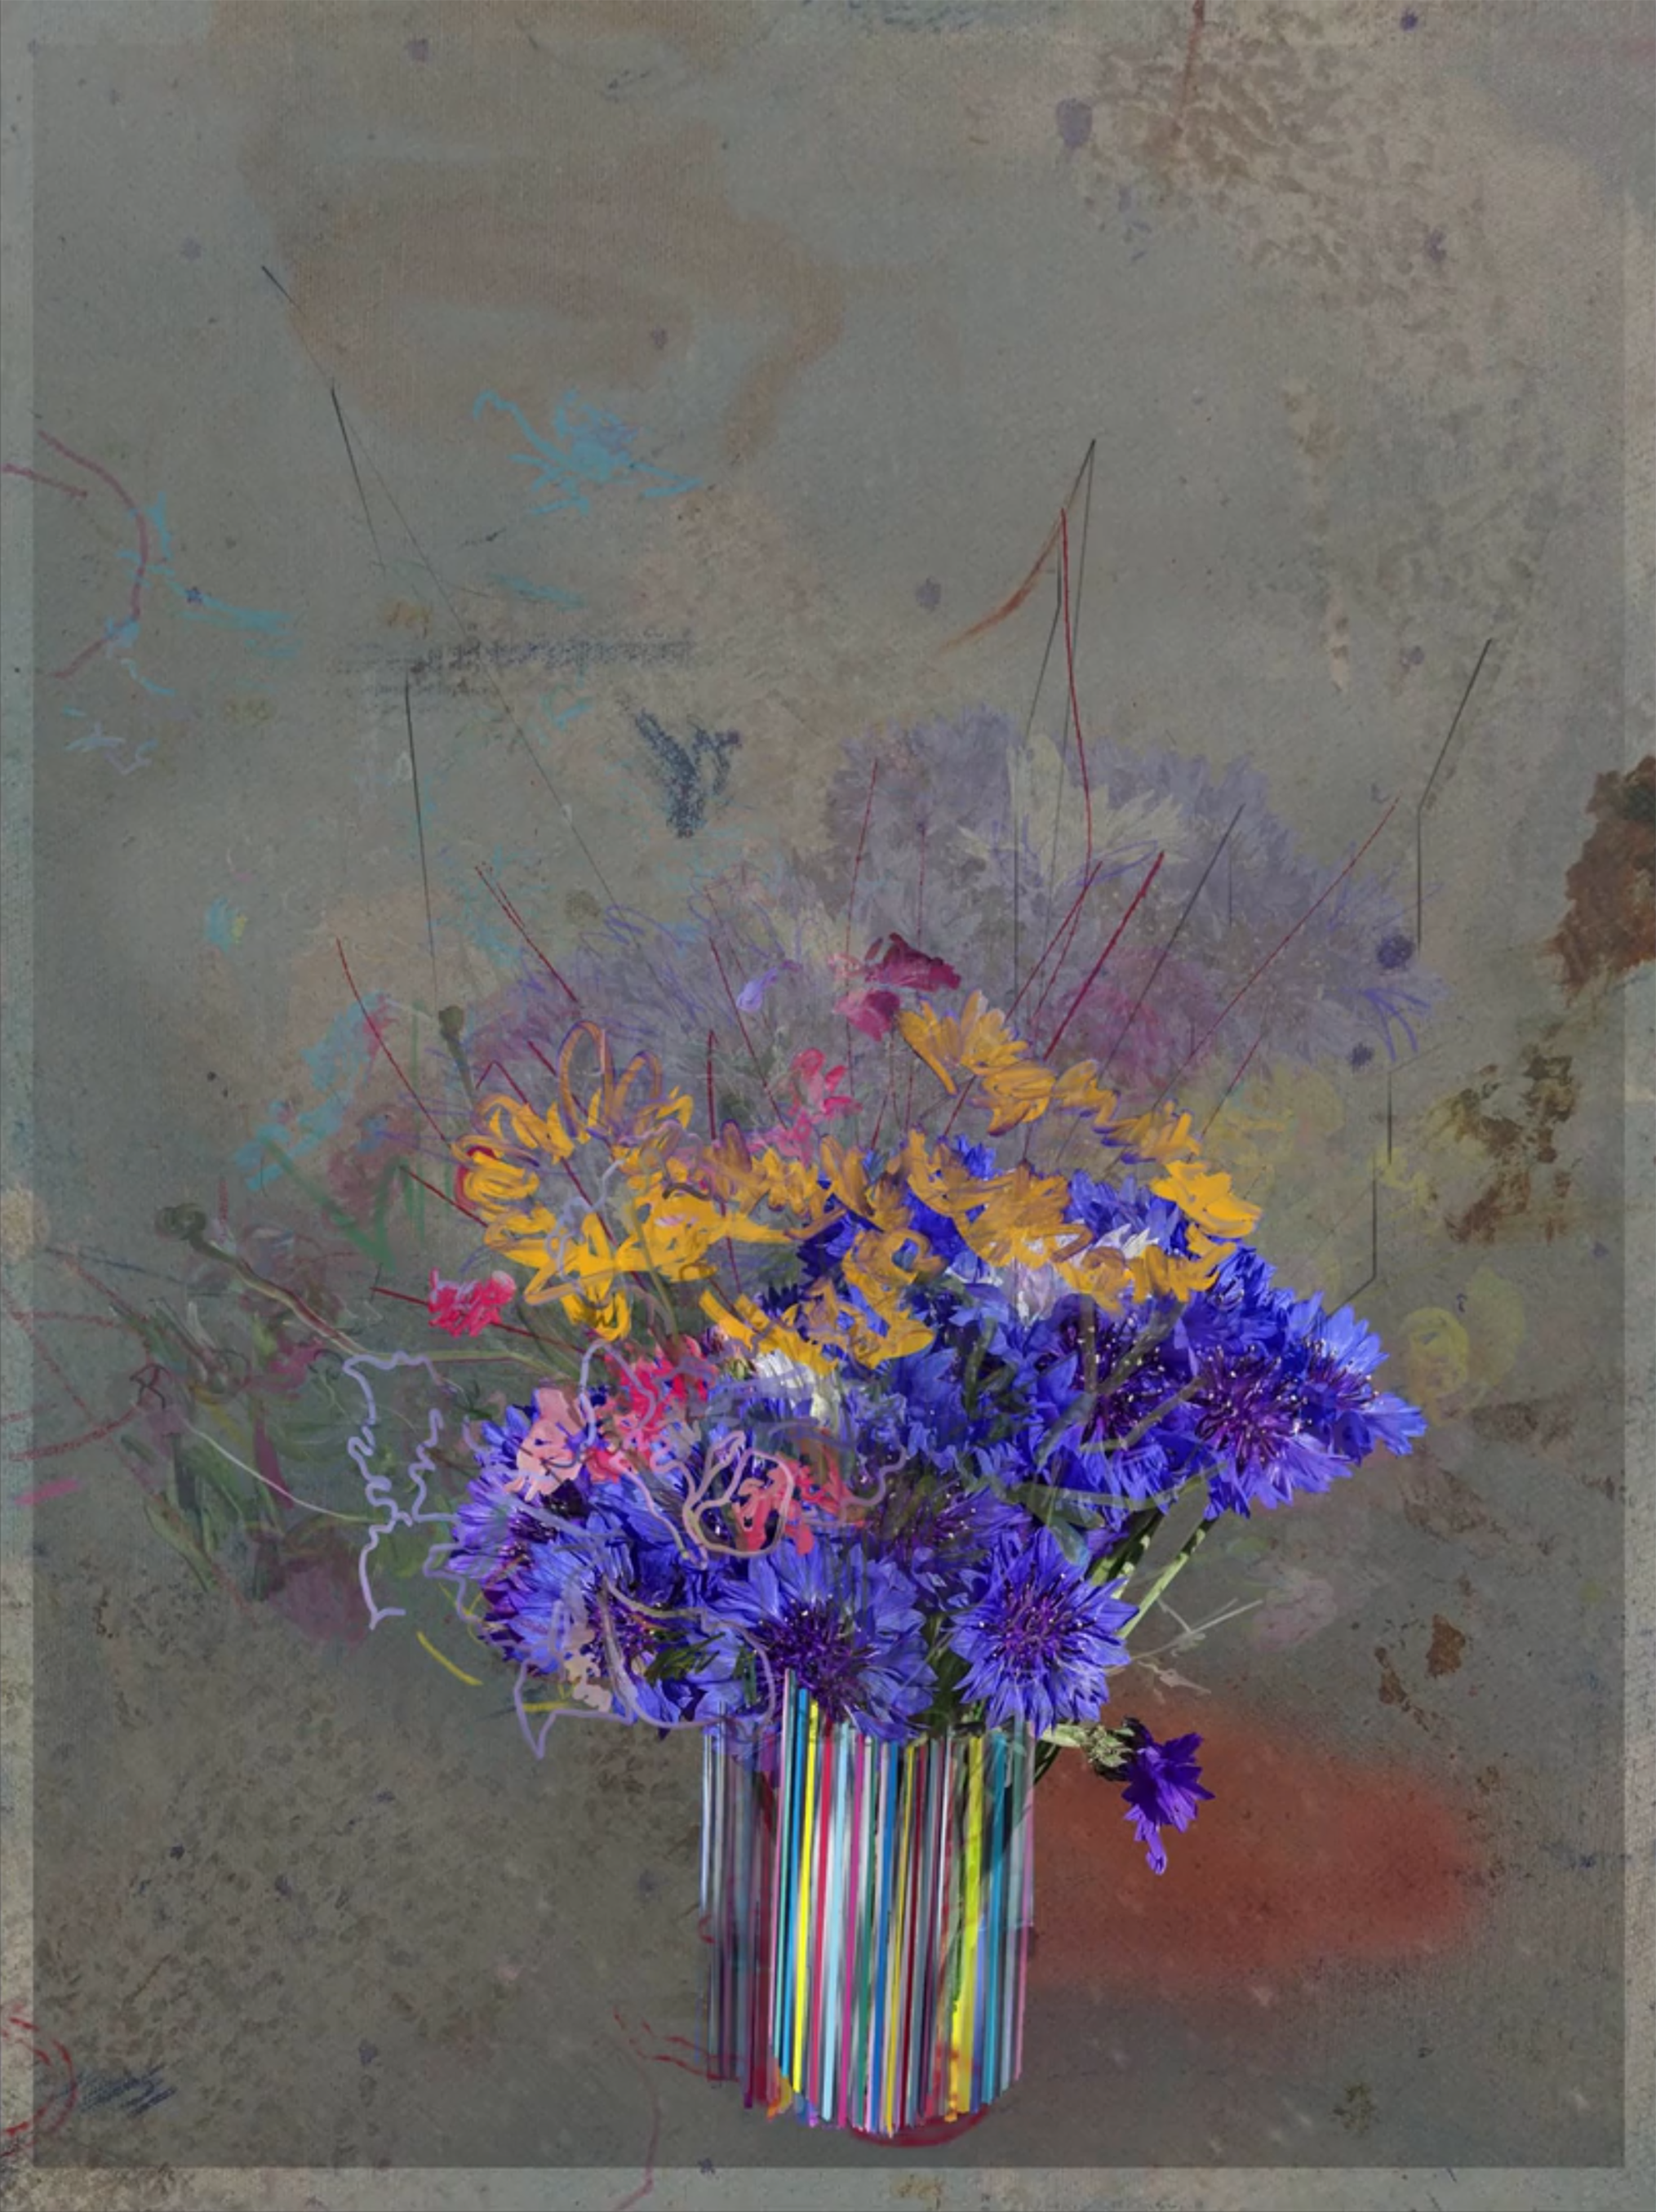  PC Flower Vase 001 by Petra Cortright, sold on Superrare platform